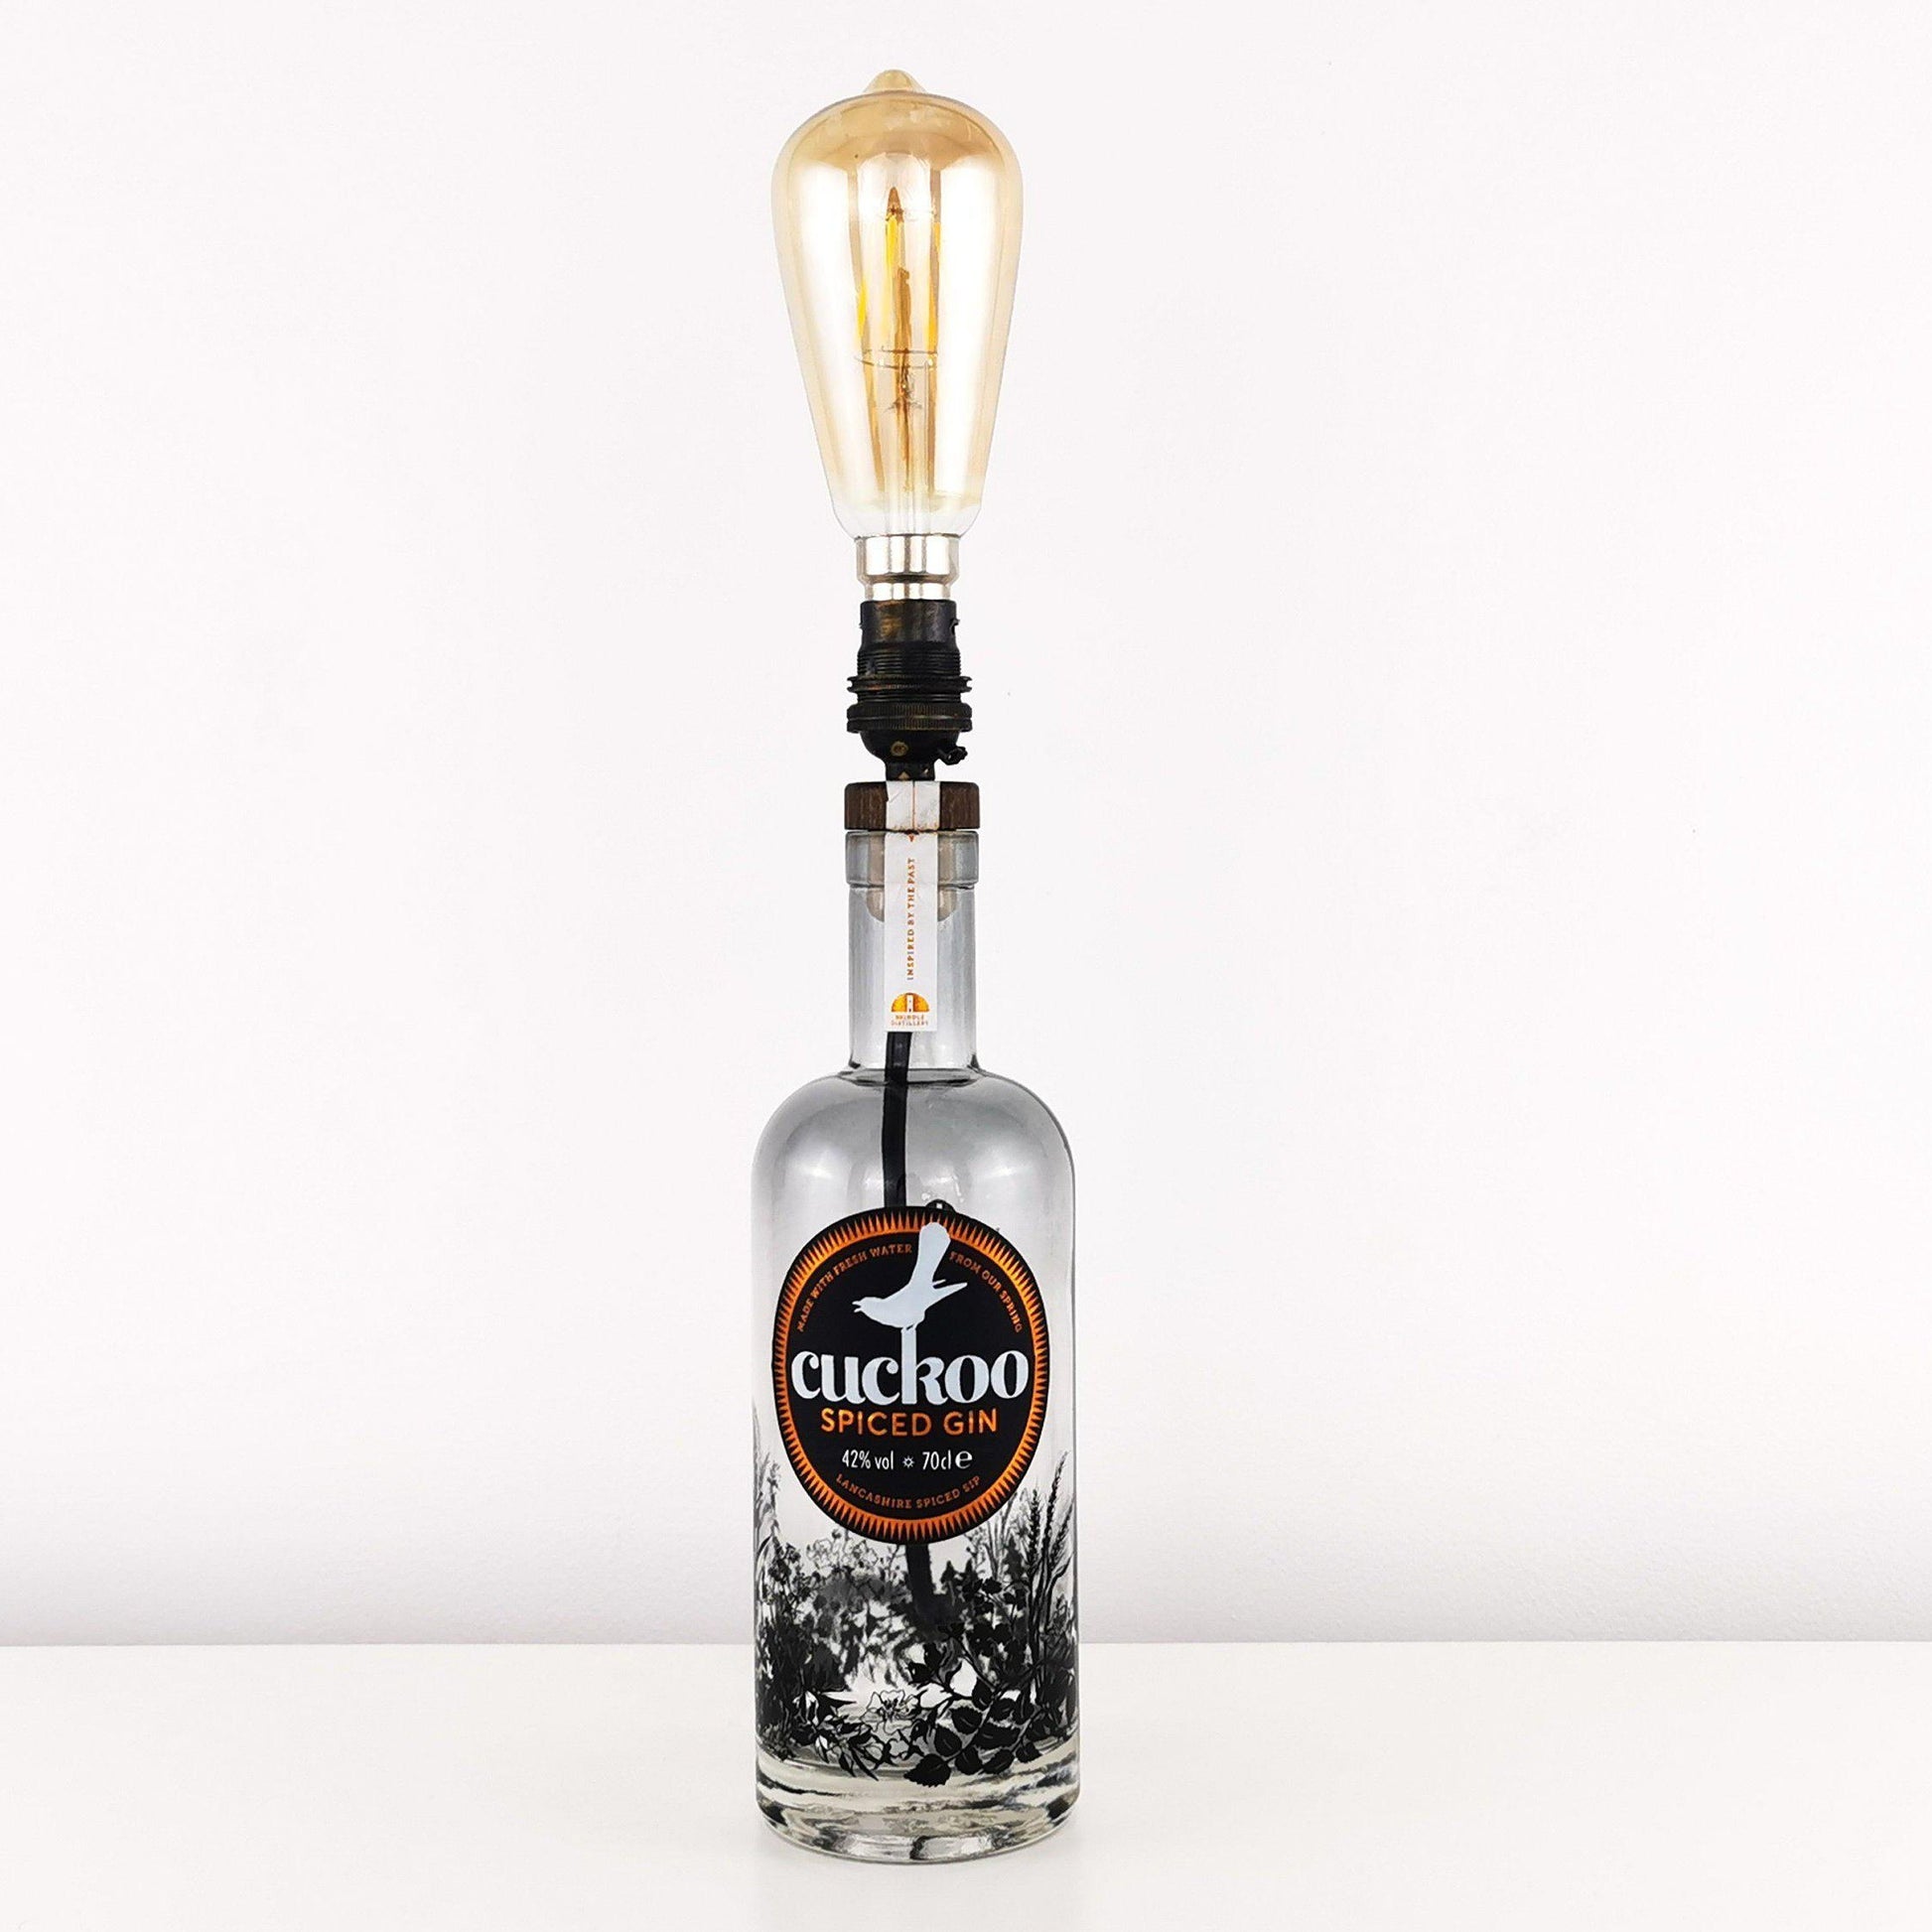 Cuckoo Spiced Gin Bottle Table Lamp Gin Bottle Table Lamps